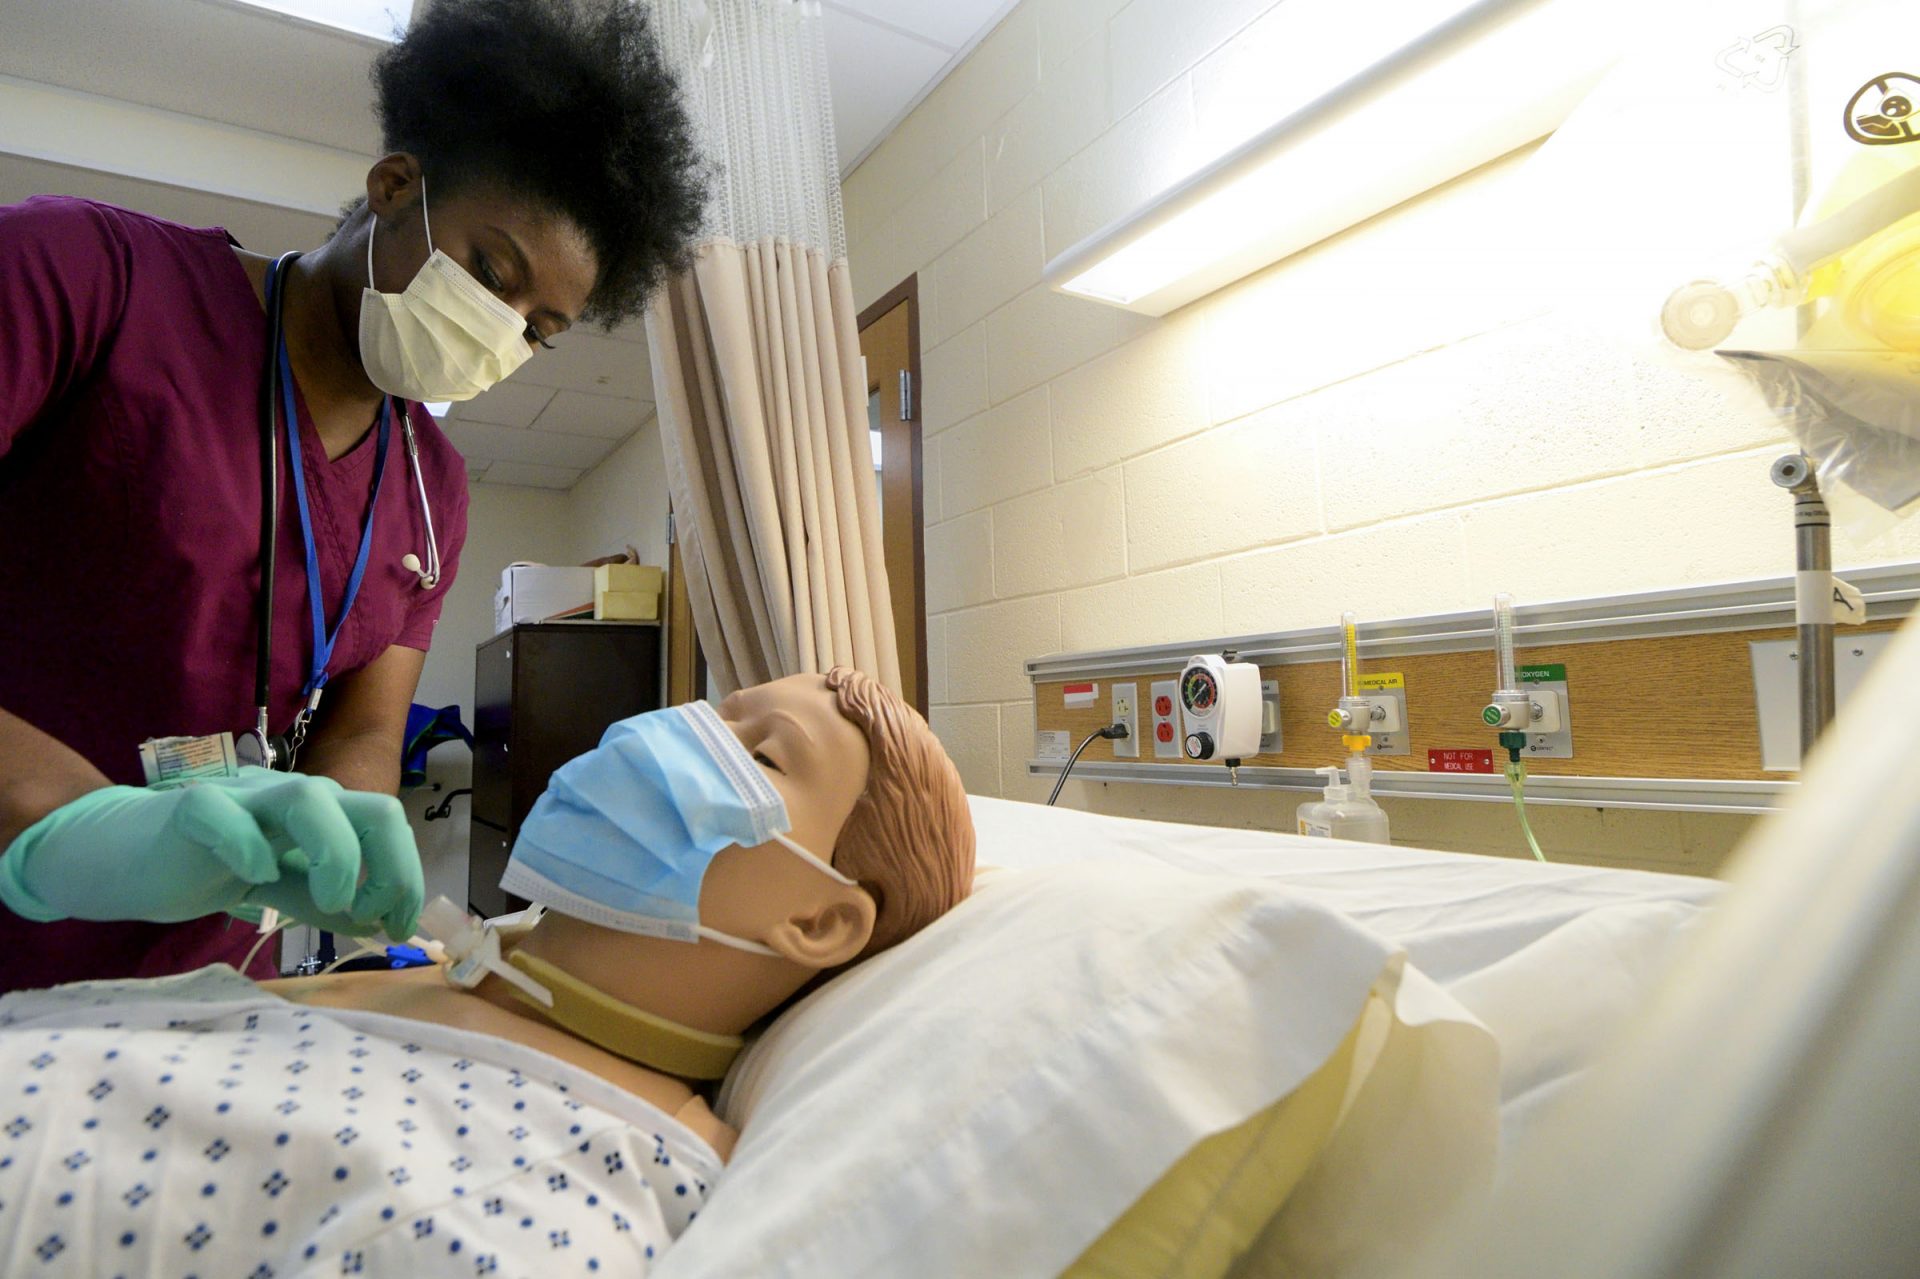 Nicole Obisie attends to a mannequin in a training situation of the Delaware County Technical School Practical Nursing Program, in Broomall, PA, on January 28, 2020.